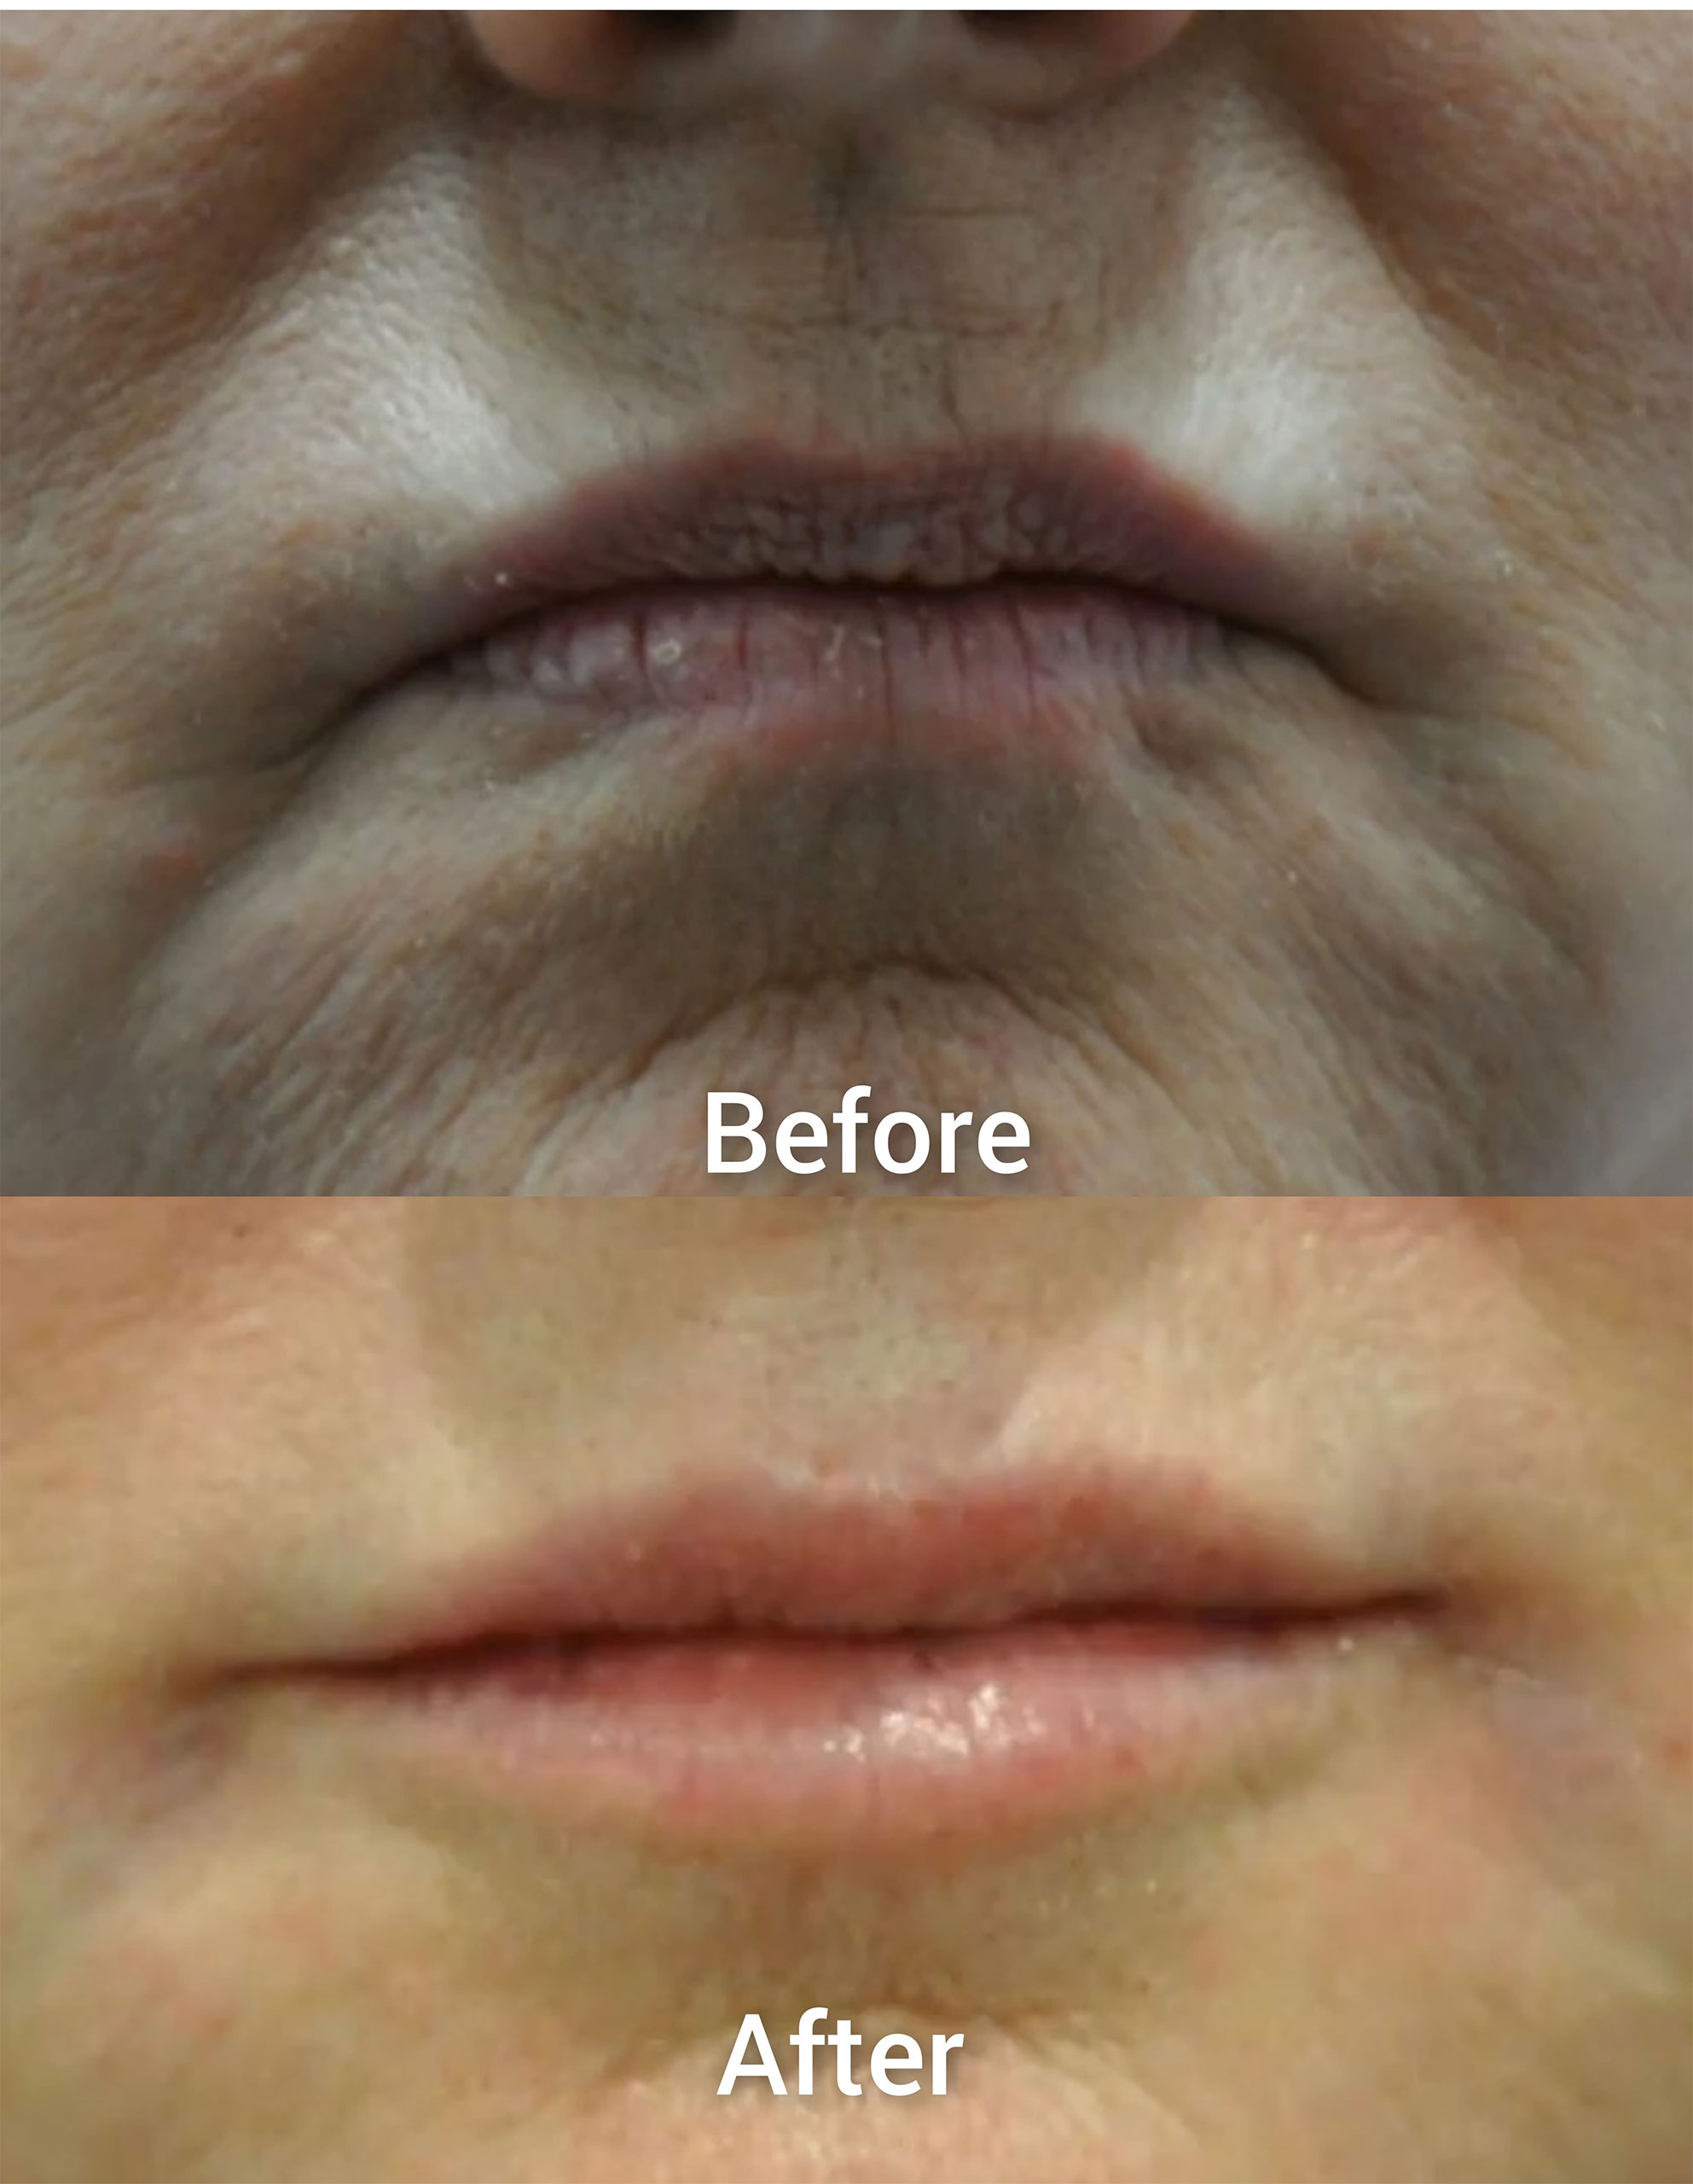 Woman in her 60’s. Her before top image shows a downturned mouth that makes her look mad and unapproachable in what many people refer to as “resting bitch face”. The after bottom image now shows a horizontalized mouth, slightly plumper top and bottom lips with a slightly impish smile at rest. This was achieved with lip fillers and Botox to the muscles around her mouth. She is beyond happy with her result.